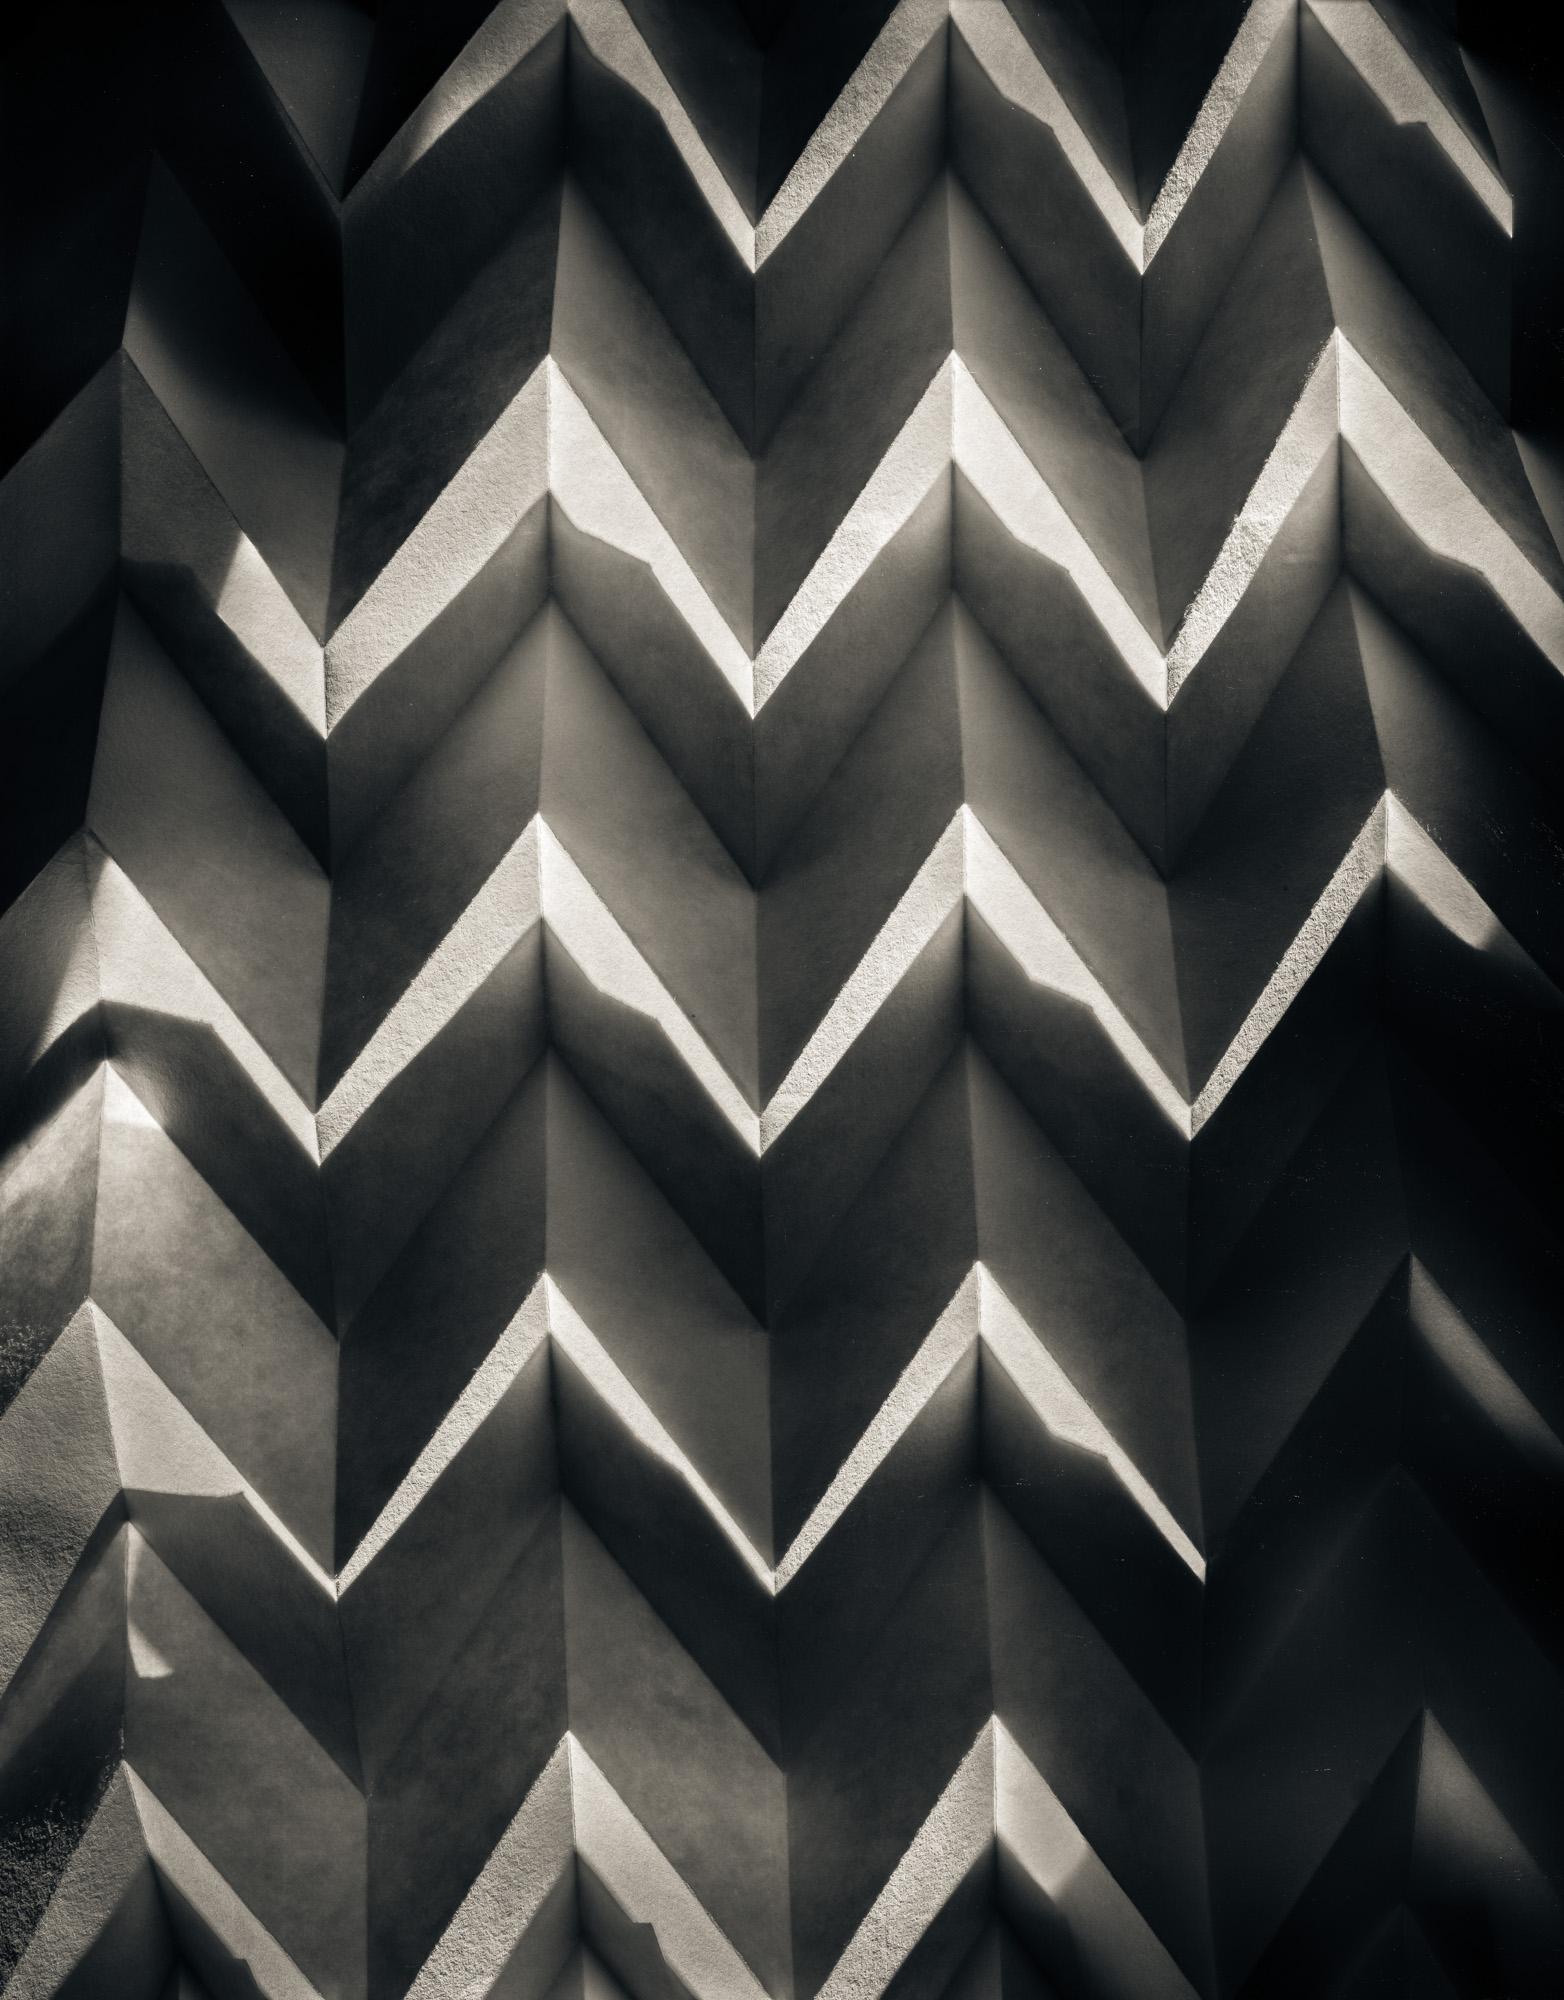 Howard Lewis Abstract Photograph -  Limited Edition Black and White Photograph - Origami Folds #10